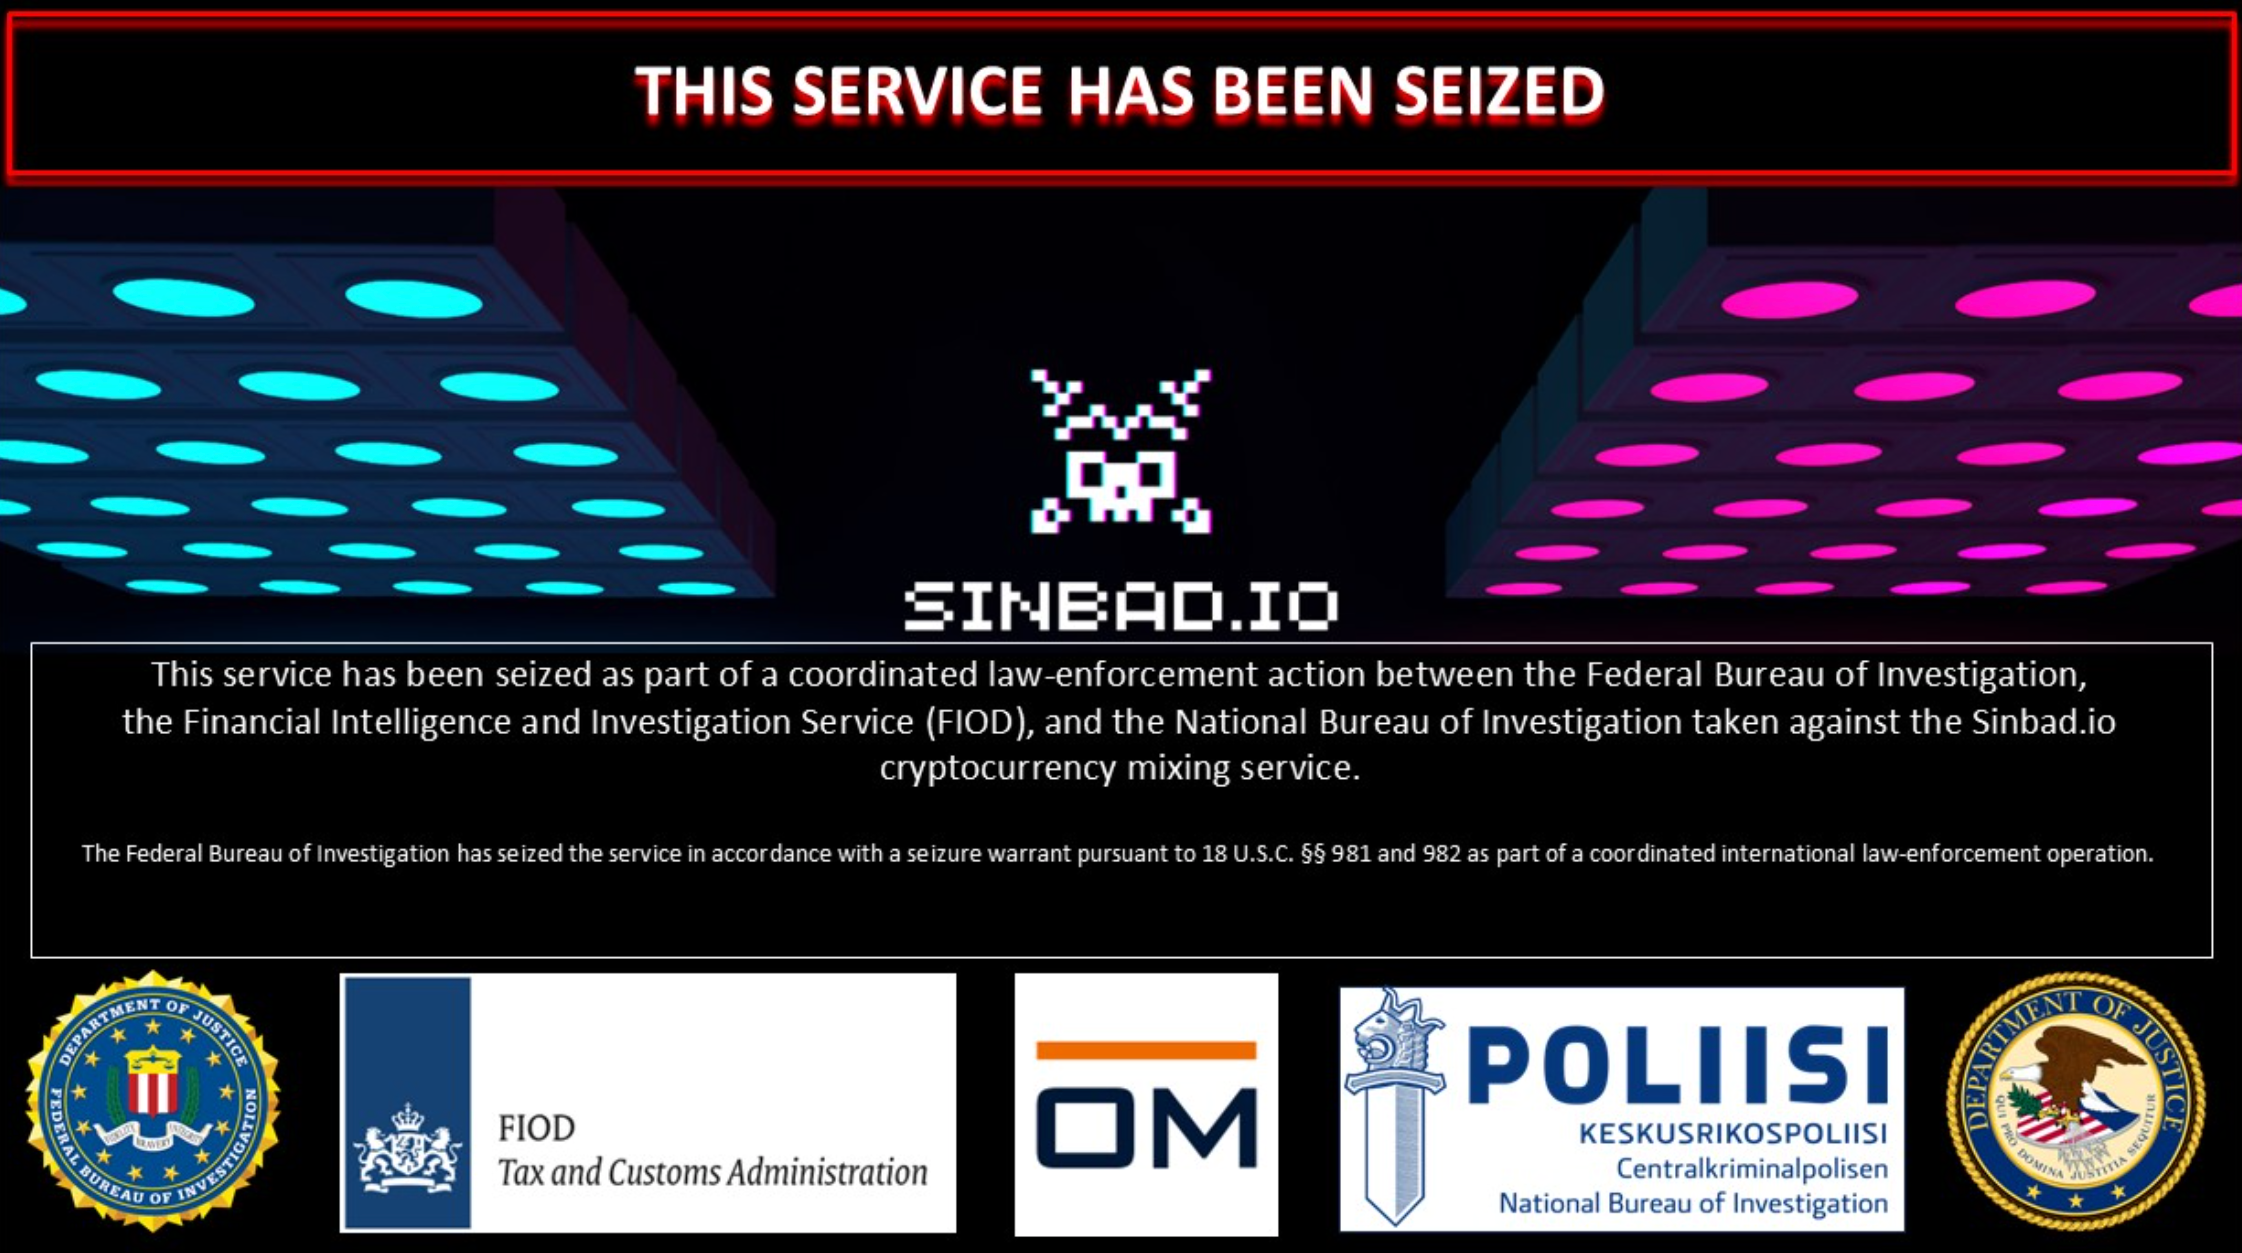 Official Seizure Notice for Sinbad.io Cryptocurrency Mixing Service